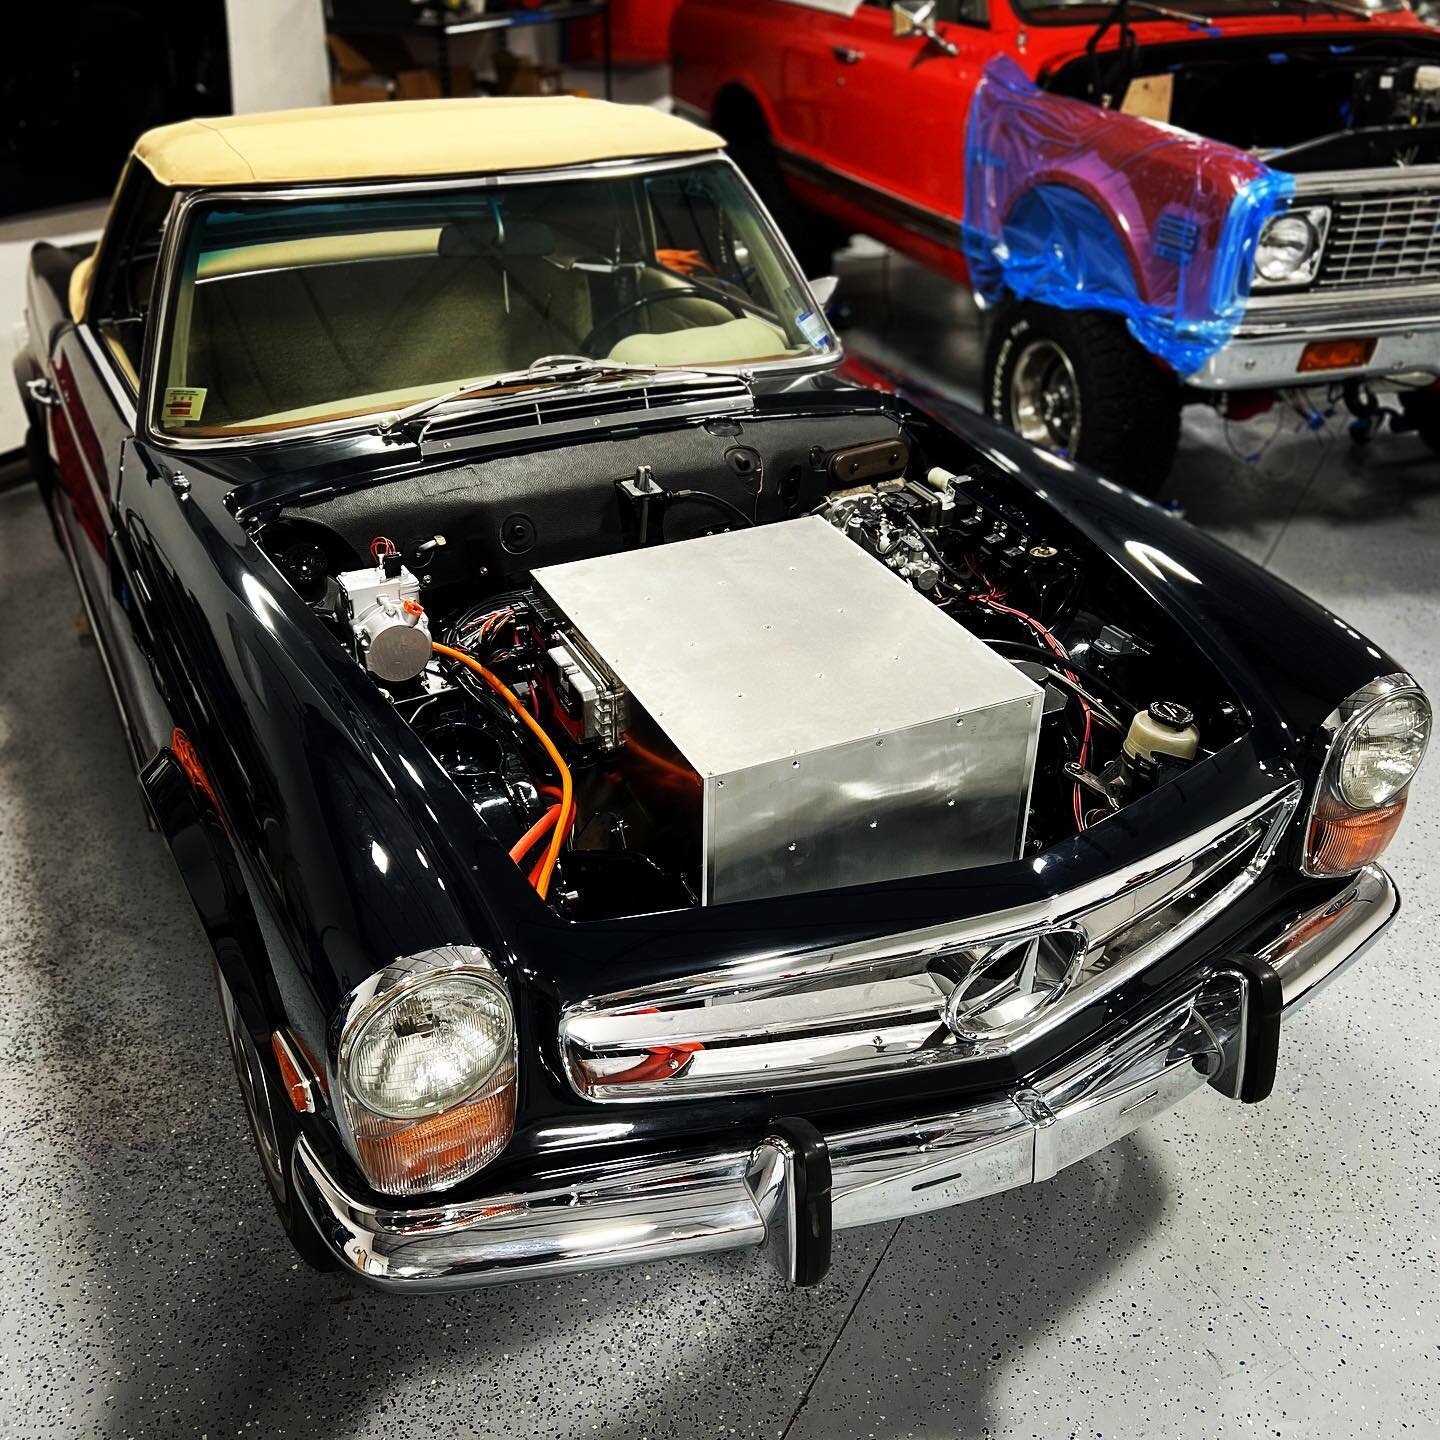 Sneak peek of the first of five pagodas coming together - 375lb-ft, 300hp, 62kWh - smooth as glass and a joy to drive. These are going to be incredible cars&hellip; #mercedes #mercedesbenz #mercedes280sl #mercedespagoda #classicmercedes #MomentSL #cl